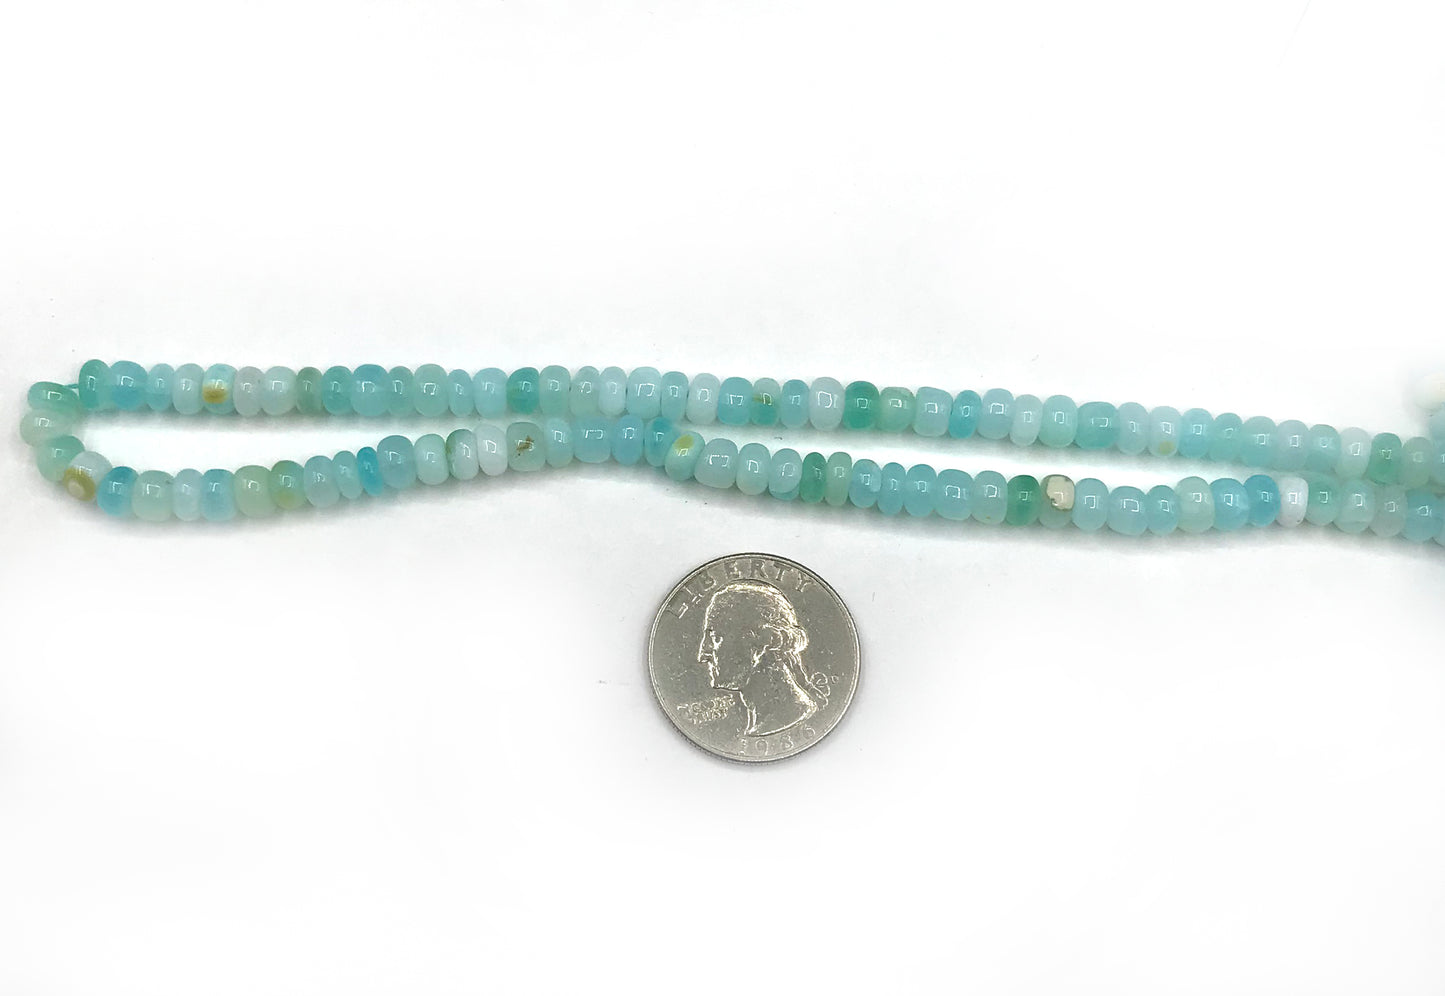 Blue Opal Beads Smooth Rondelle